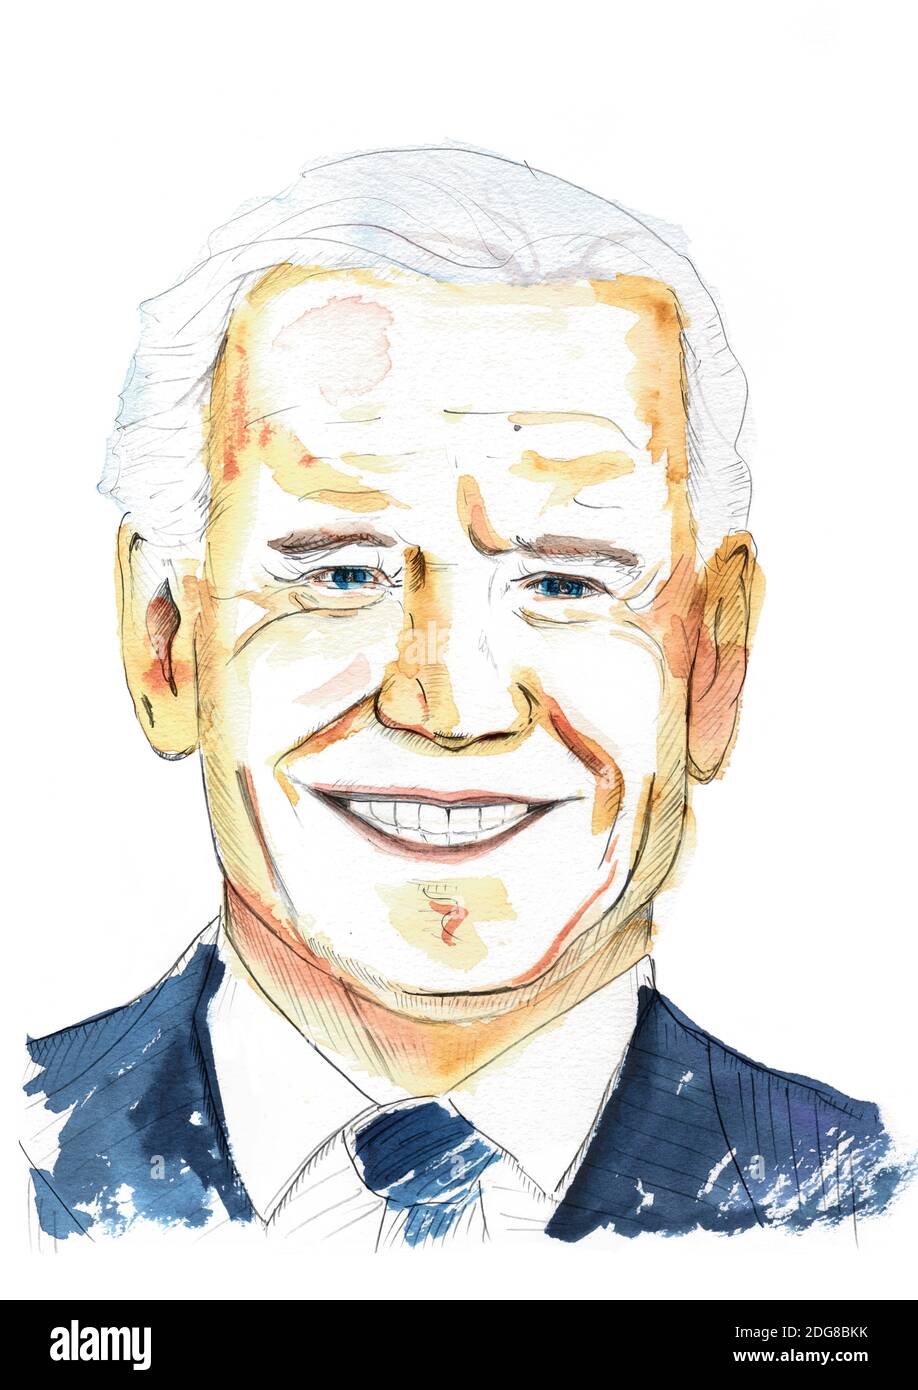 Madrid, Spain - December 8, 2020: a watercolour and pencil portrait of Joe Biden, American president. Hand drawn watercolor illustration on a white background Stock Photo